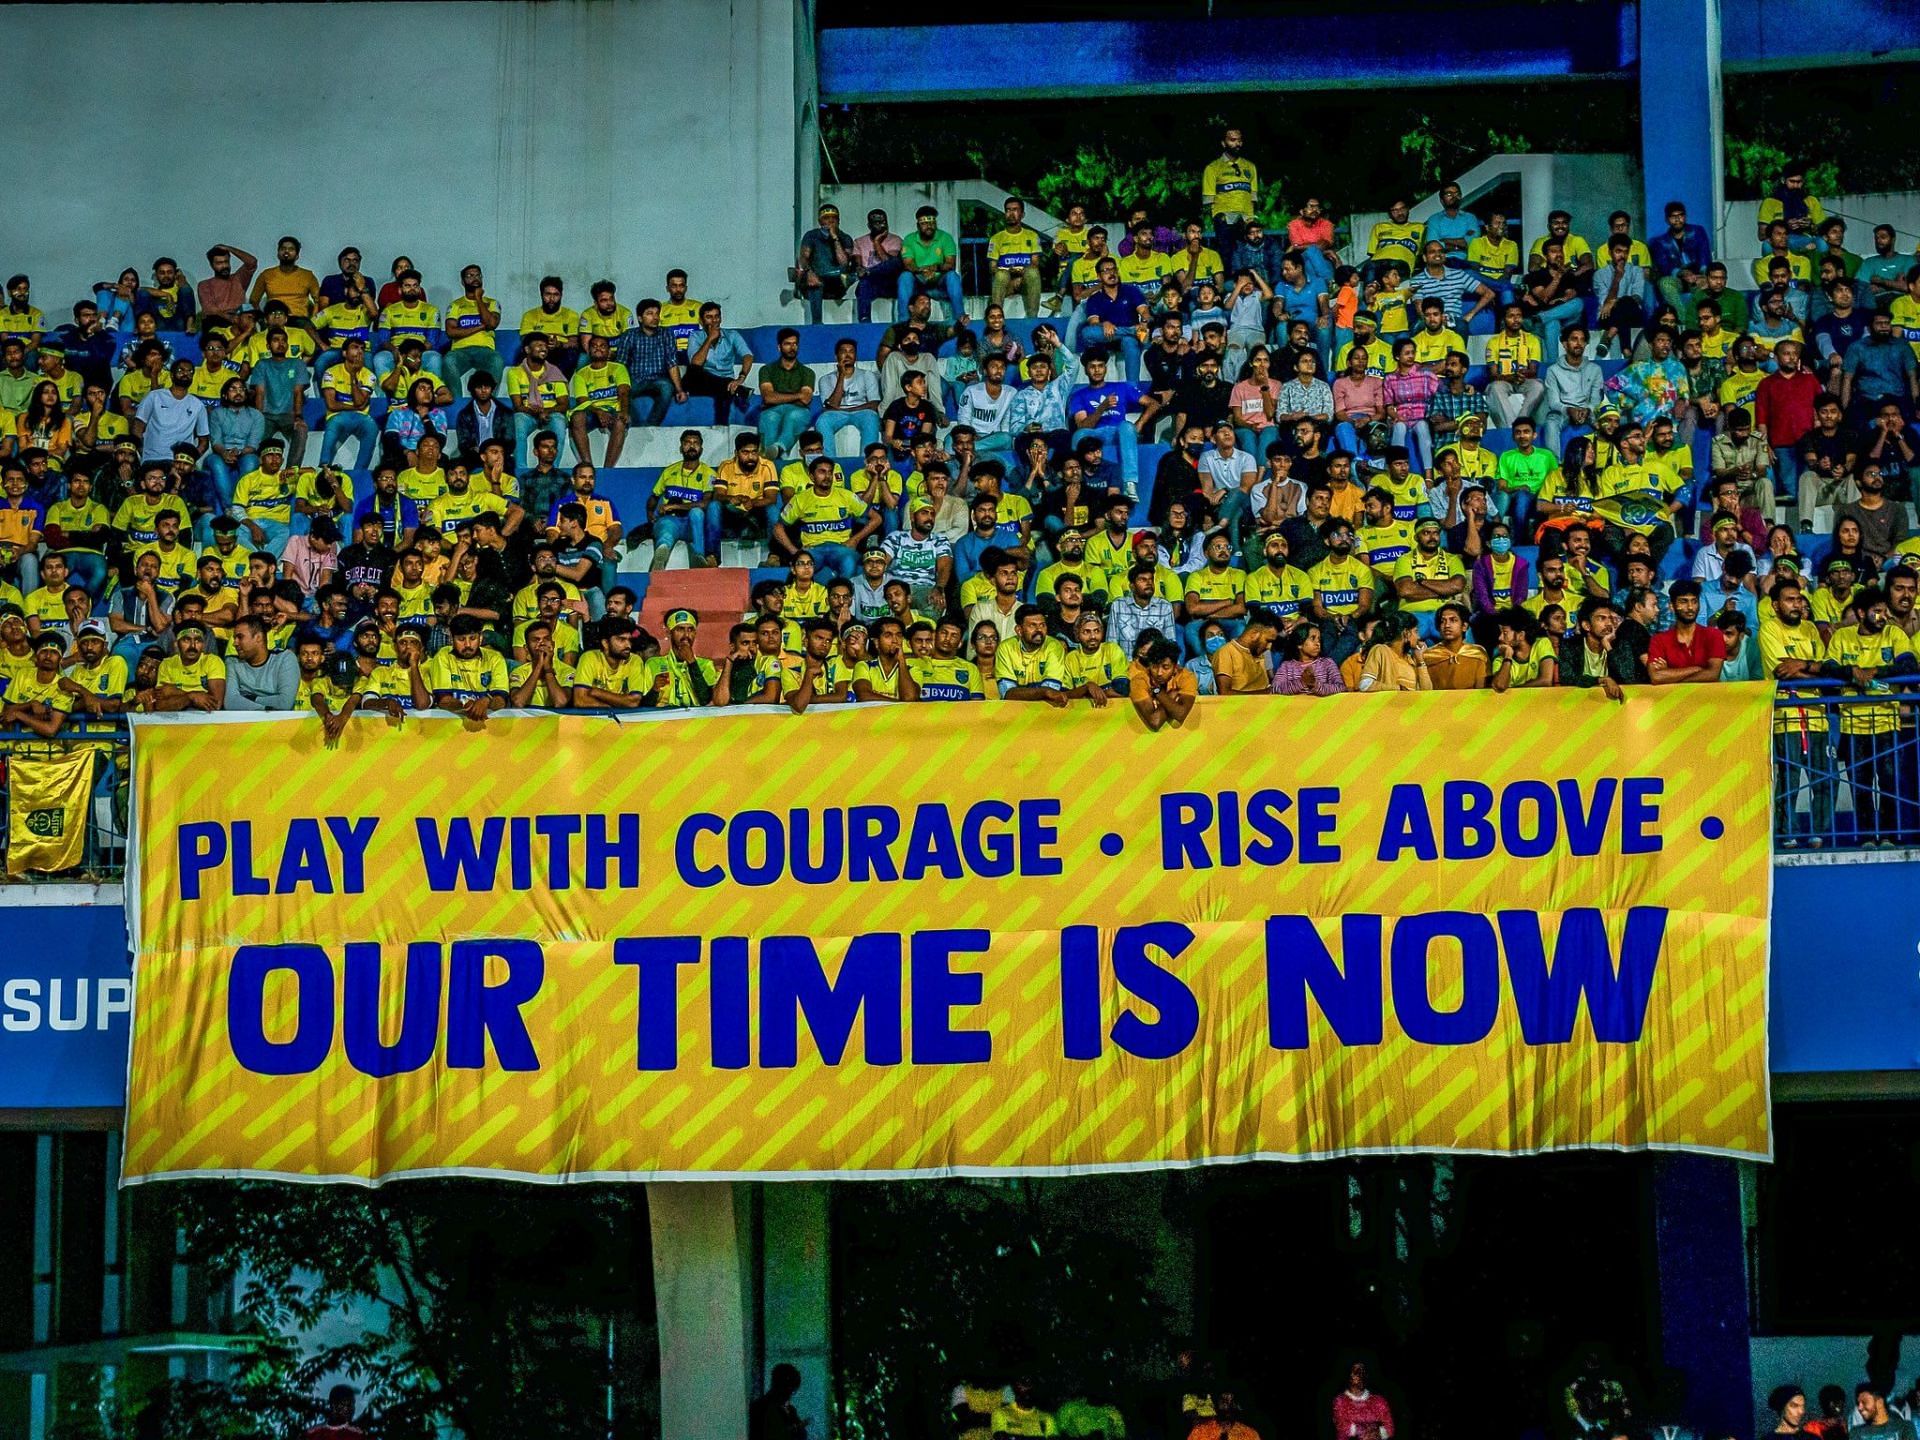 Kerala Blasters FC fans have supported the action of the head coach and players.